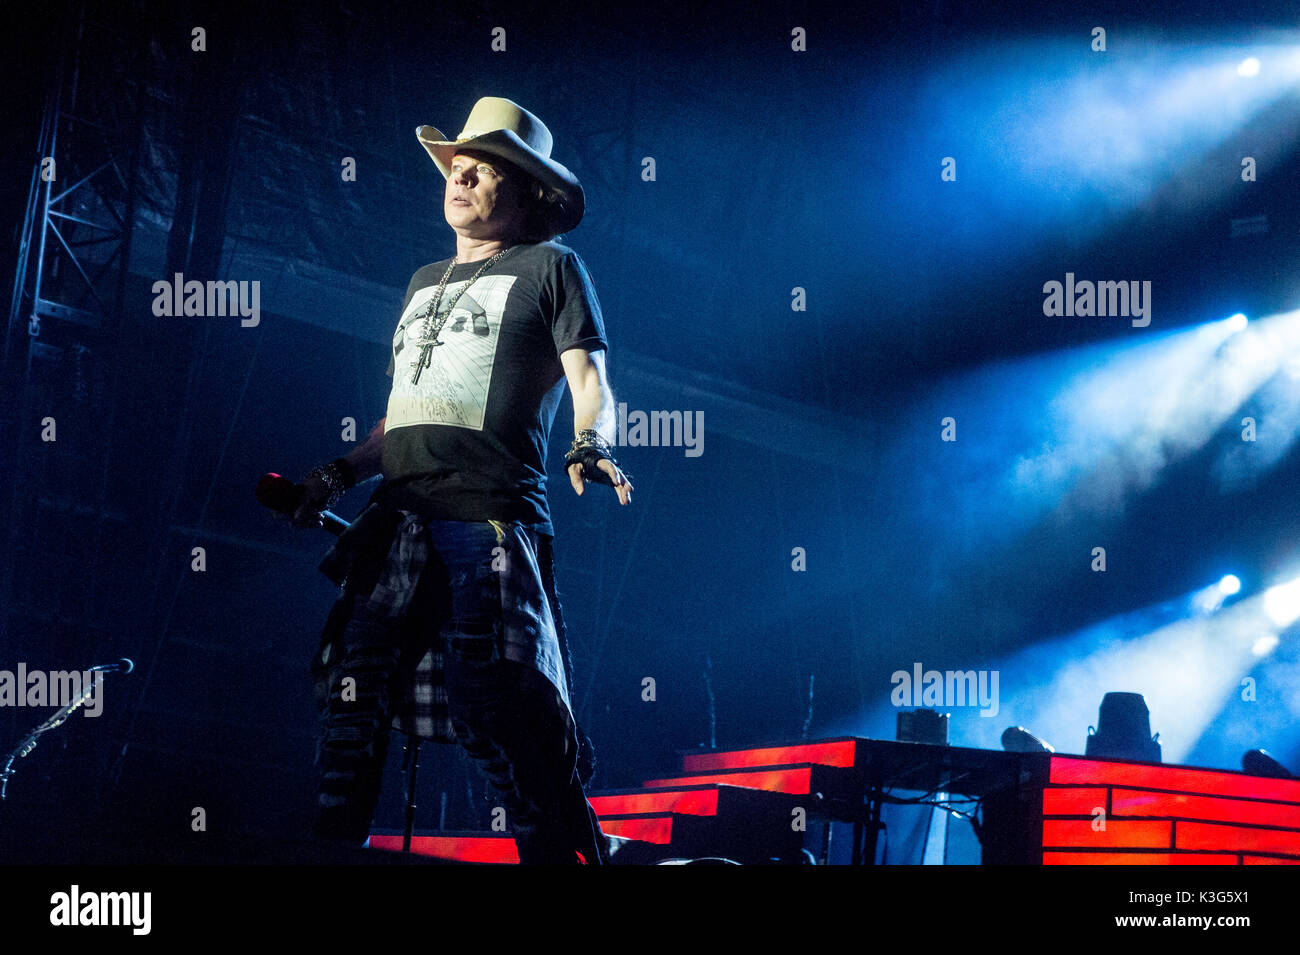 Vancouver, CANADA. 1st Sep, 2017. American rock band Guns N' Roses performing during their 'Not In This Lifetime' tour at BC Place Stadium in Vancouver, BC, CANADA. Credit: Jamie Taylor/Alamy Live News. Stock Photo